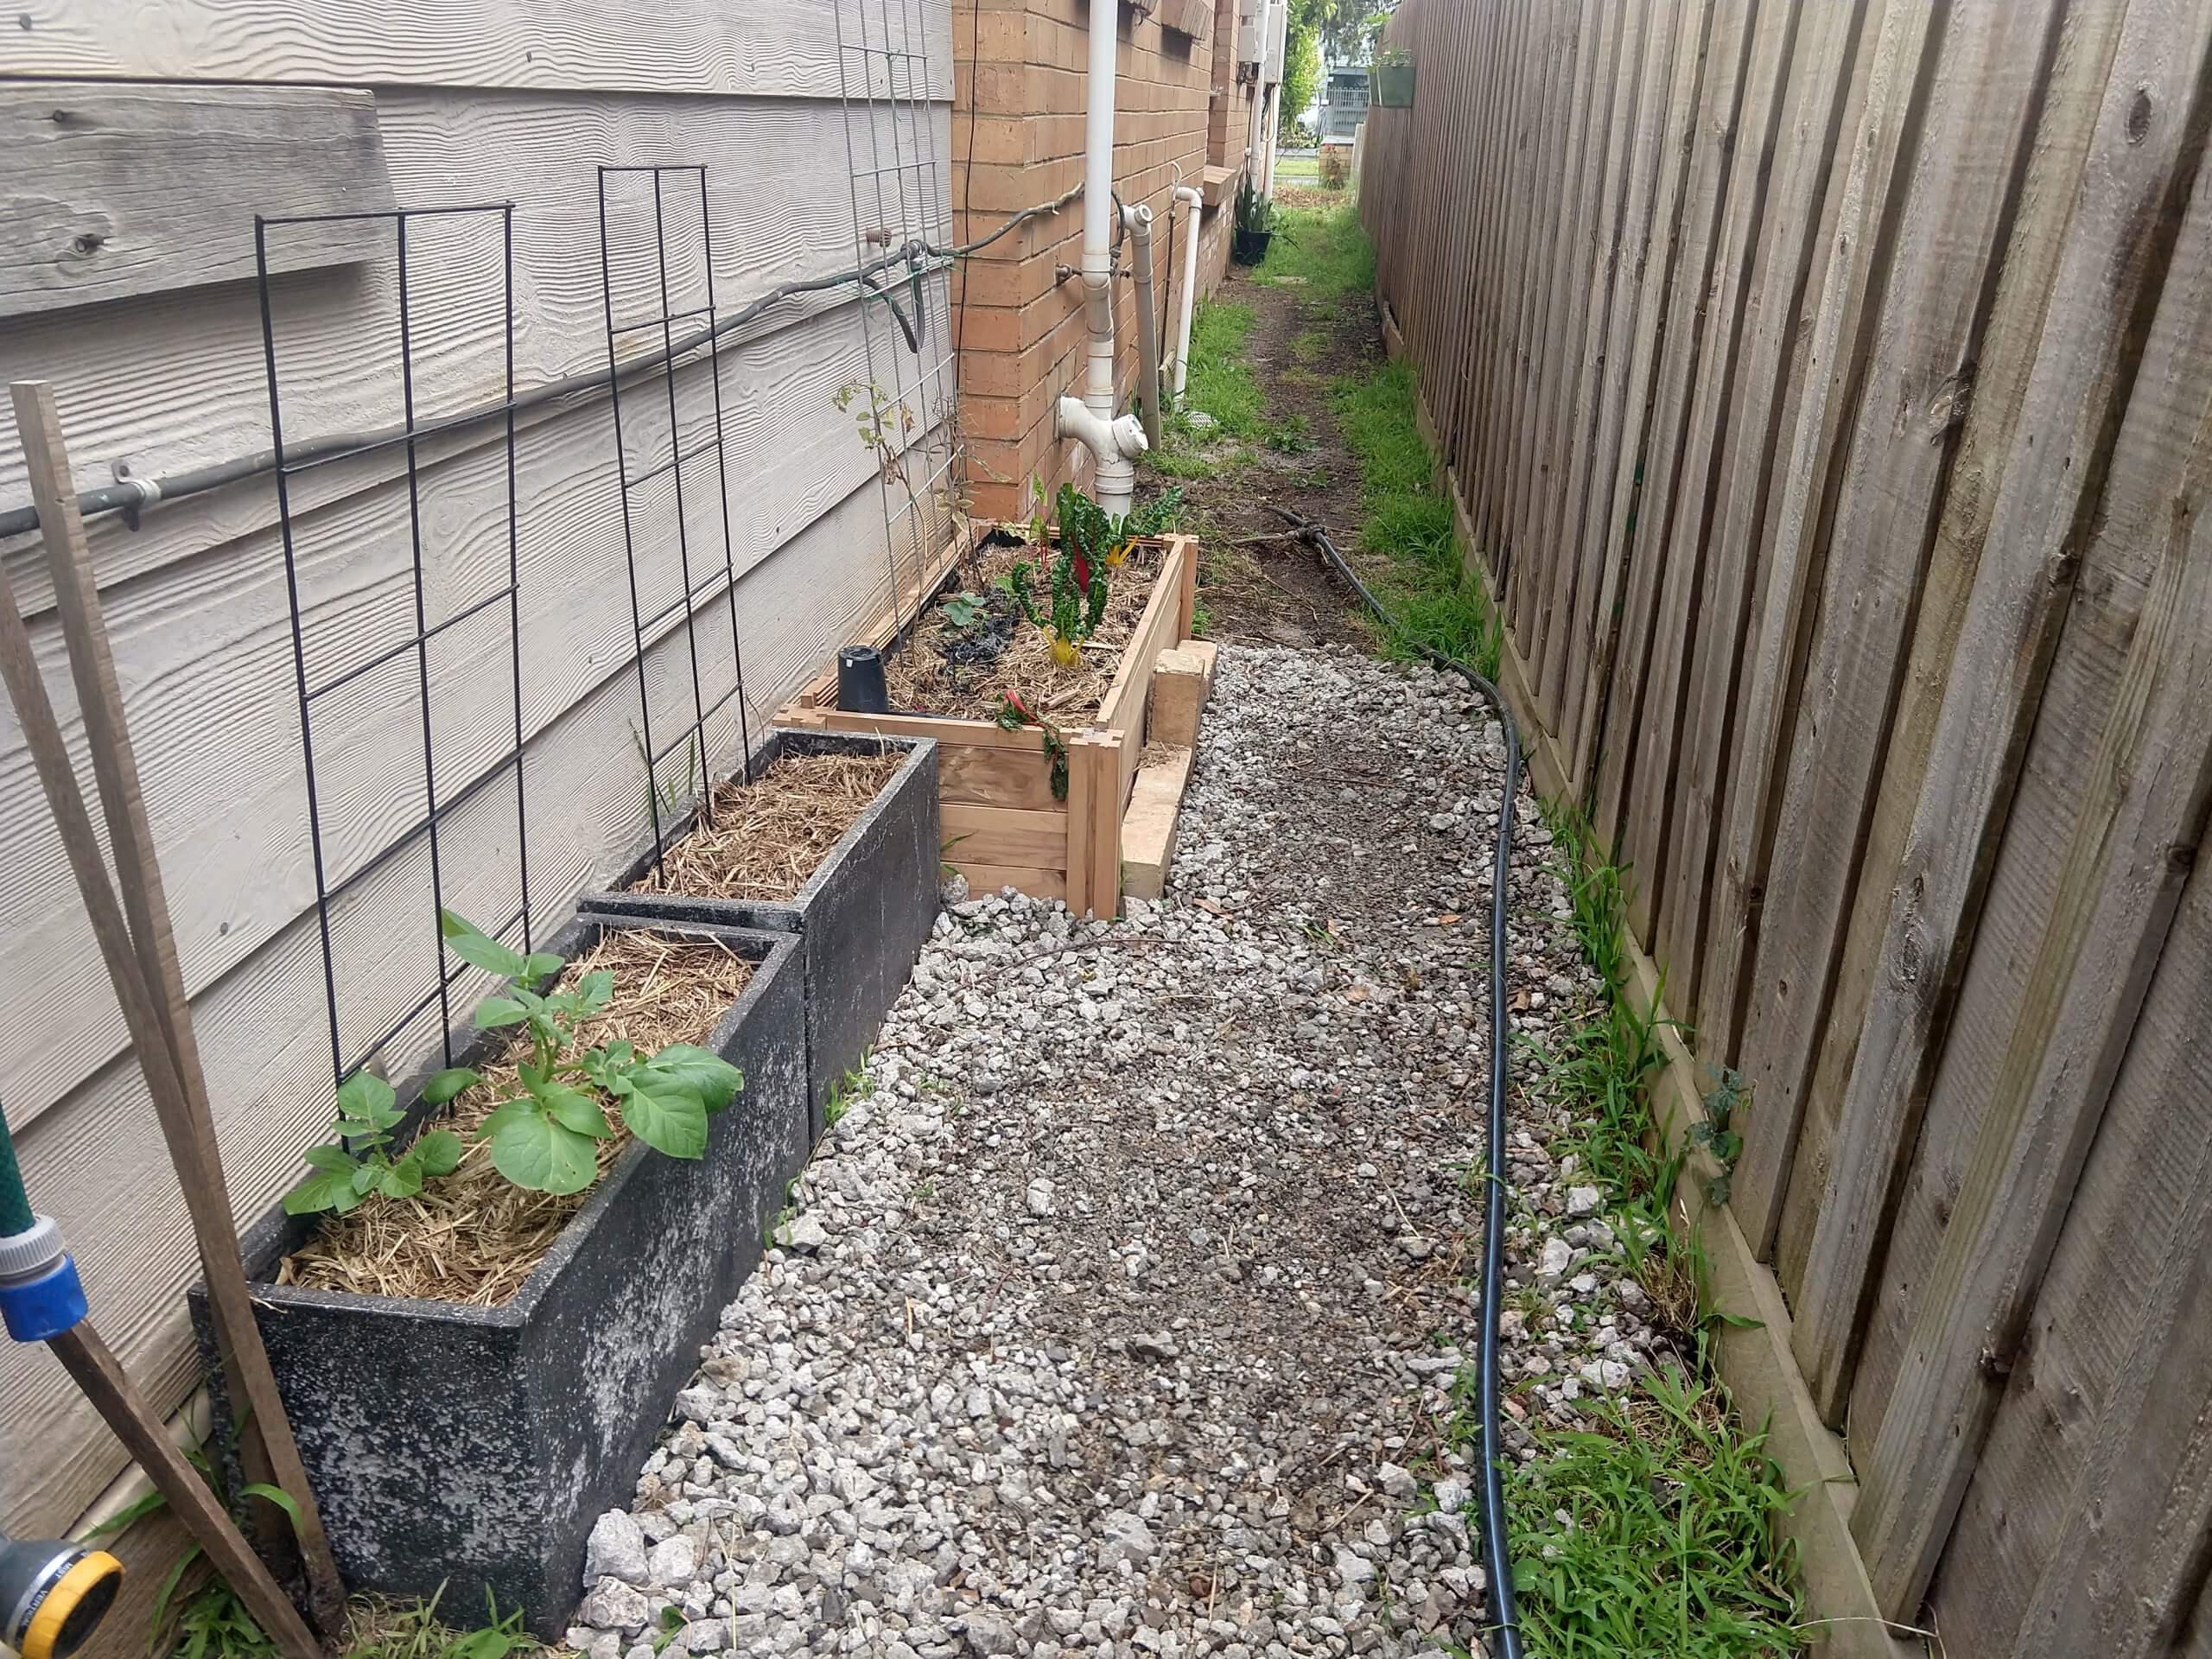 Three garden beds against the side of a house by a gravel path